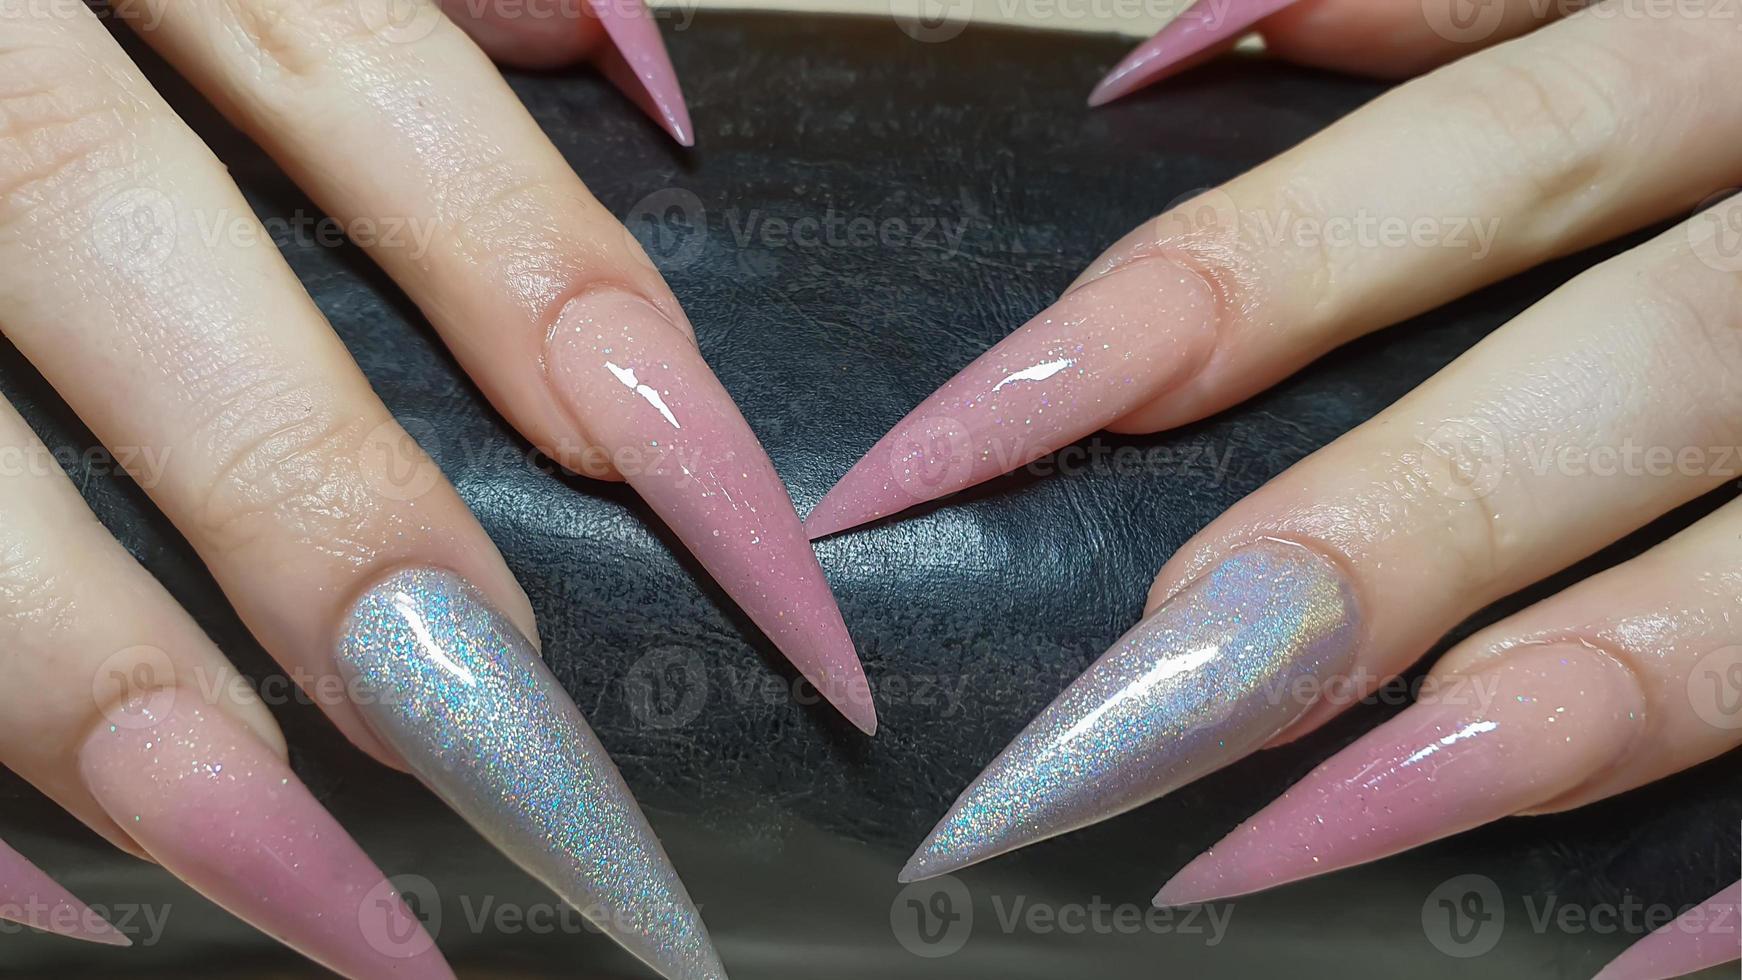 Acrylic nail extension, manicure, nail correction, hands in the foreground. Reflective design. photo